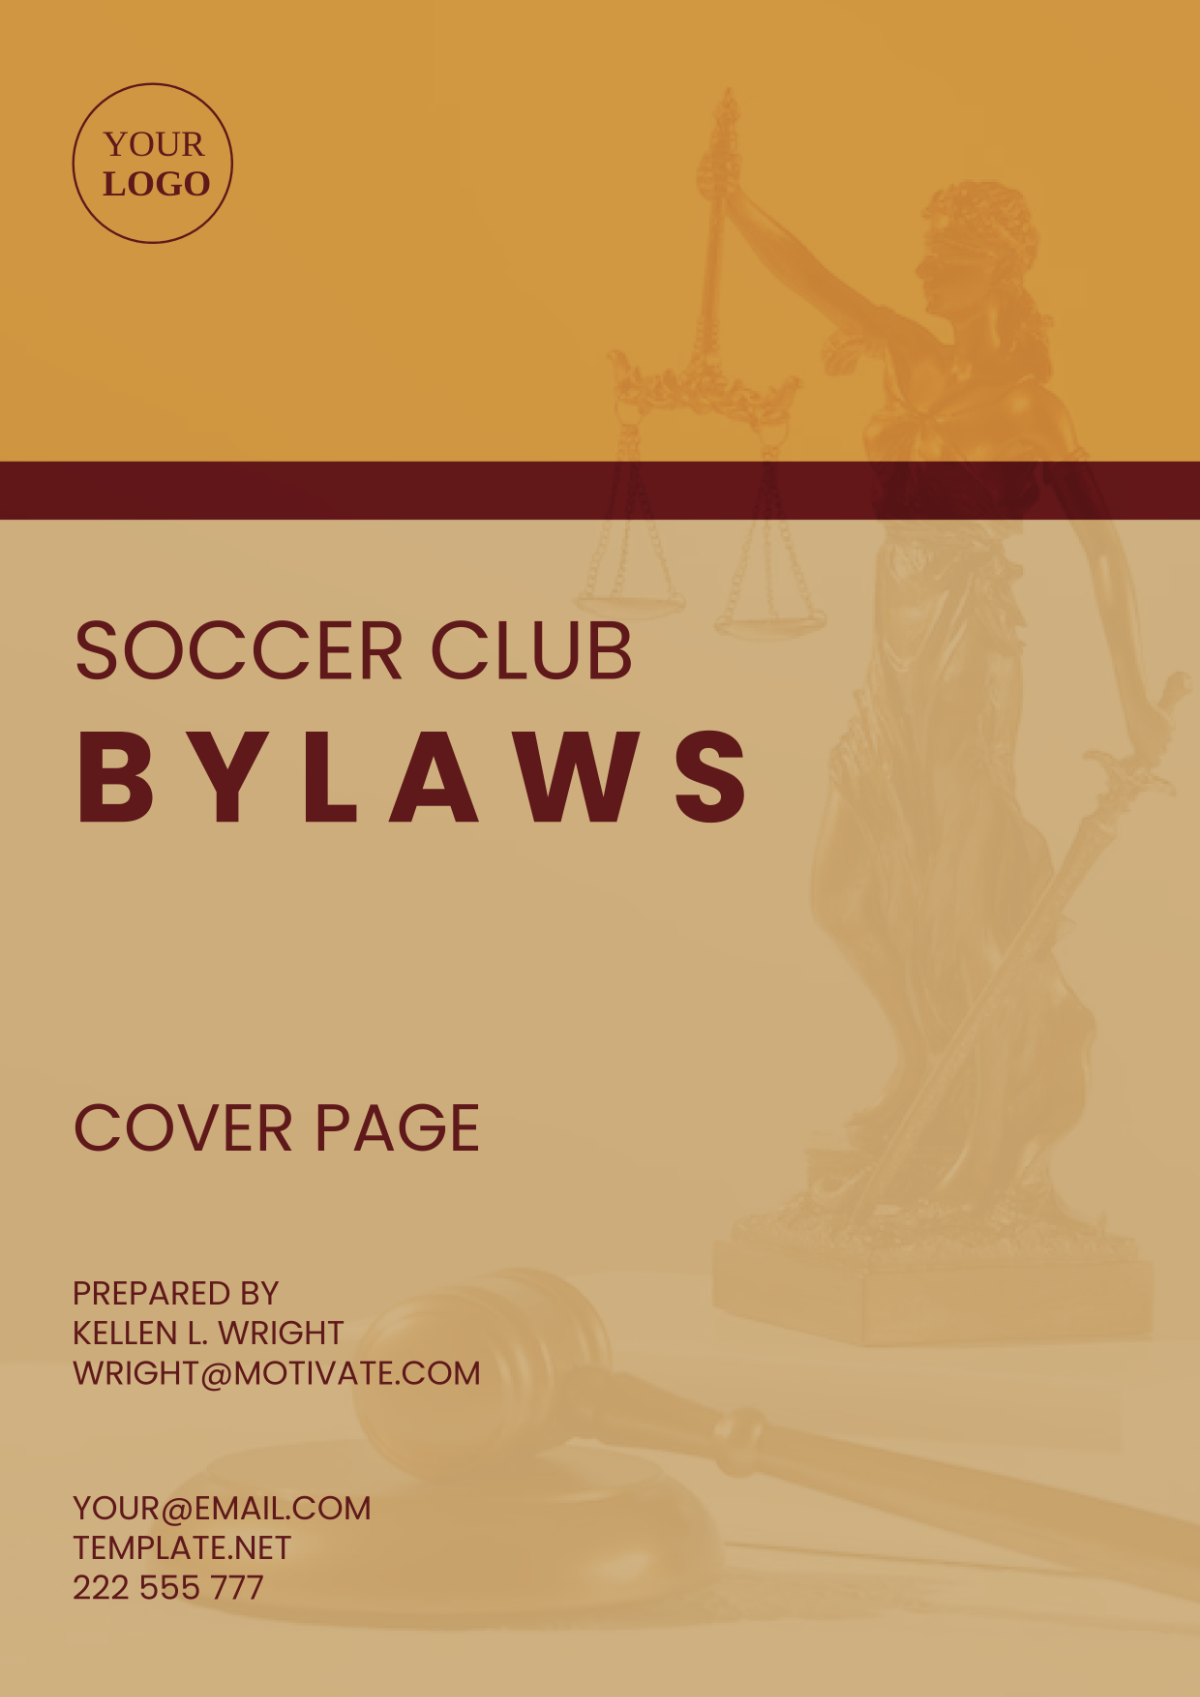 Soccer Club Bylaws Cover Page